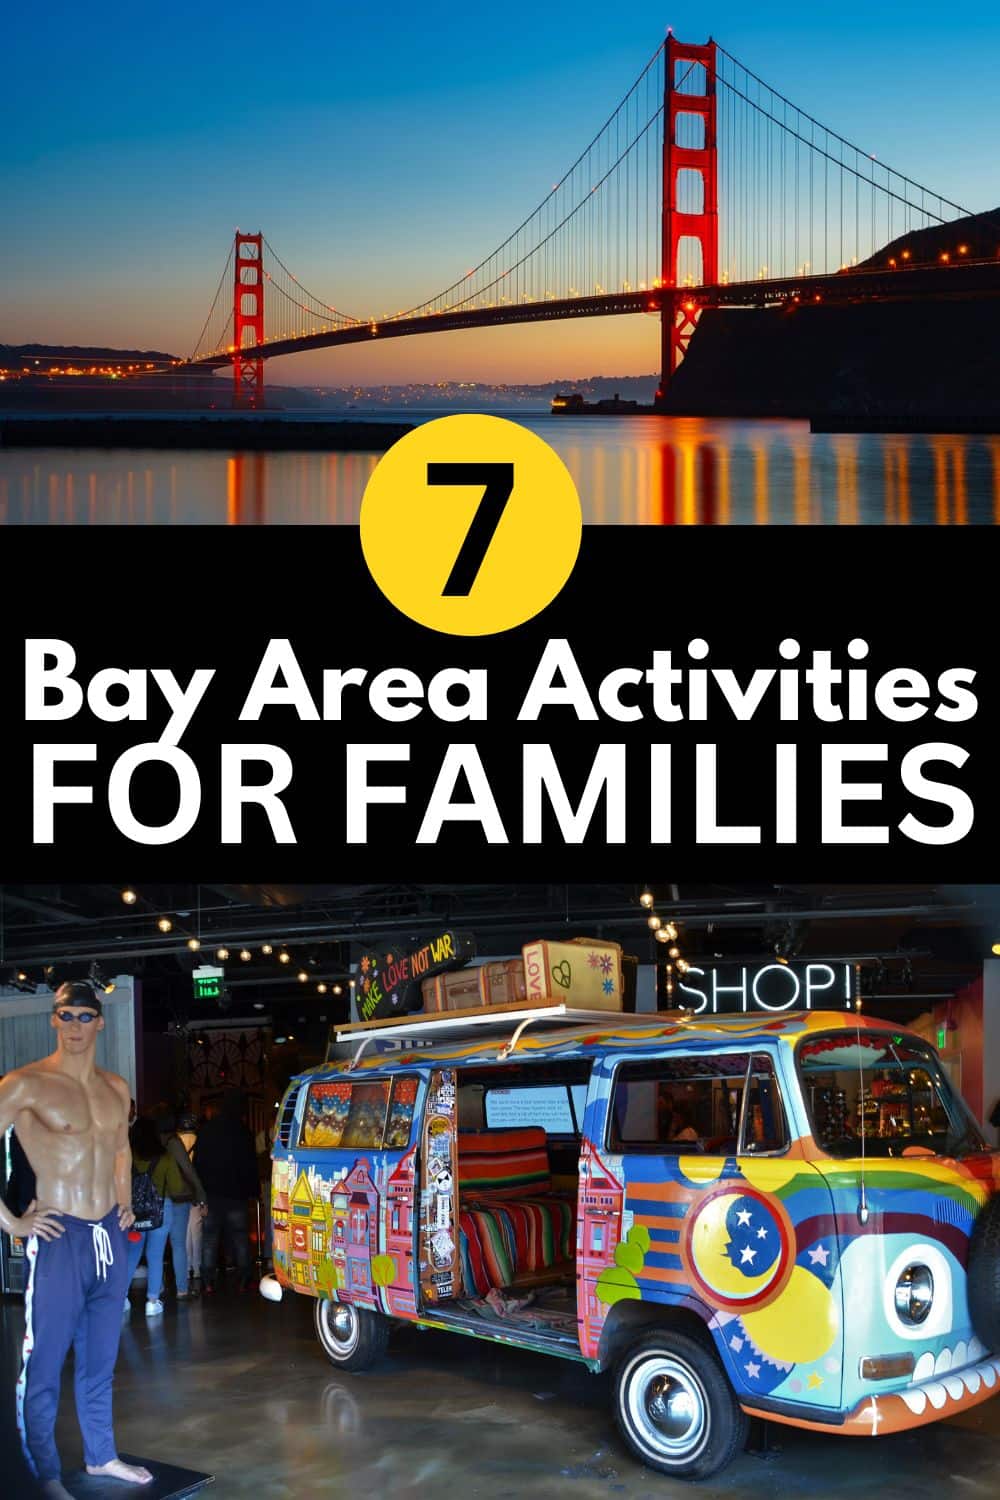 7 San Francisco Bay Area Activities for Families